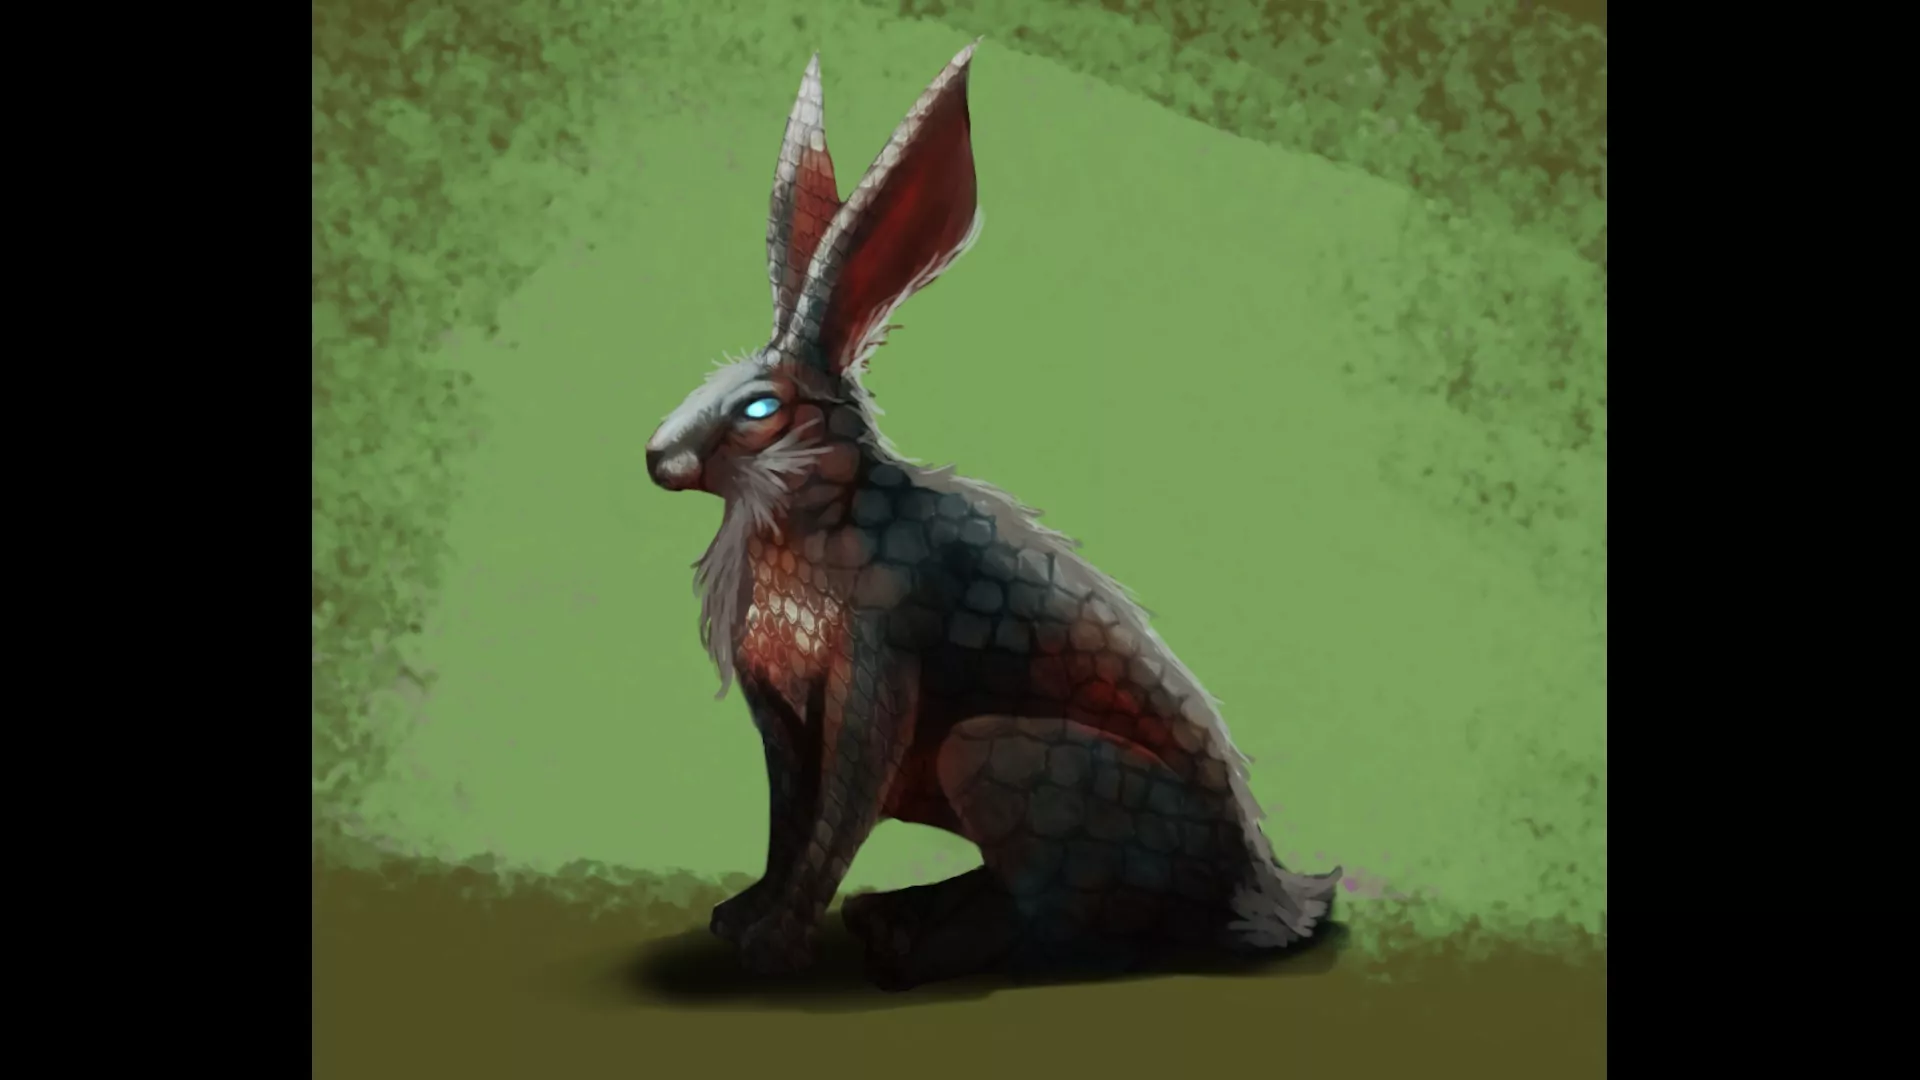 (The hare poses no danger to you, but can be hunted for fur and meat.)